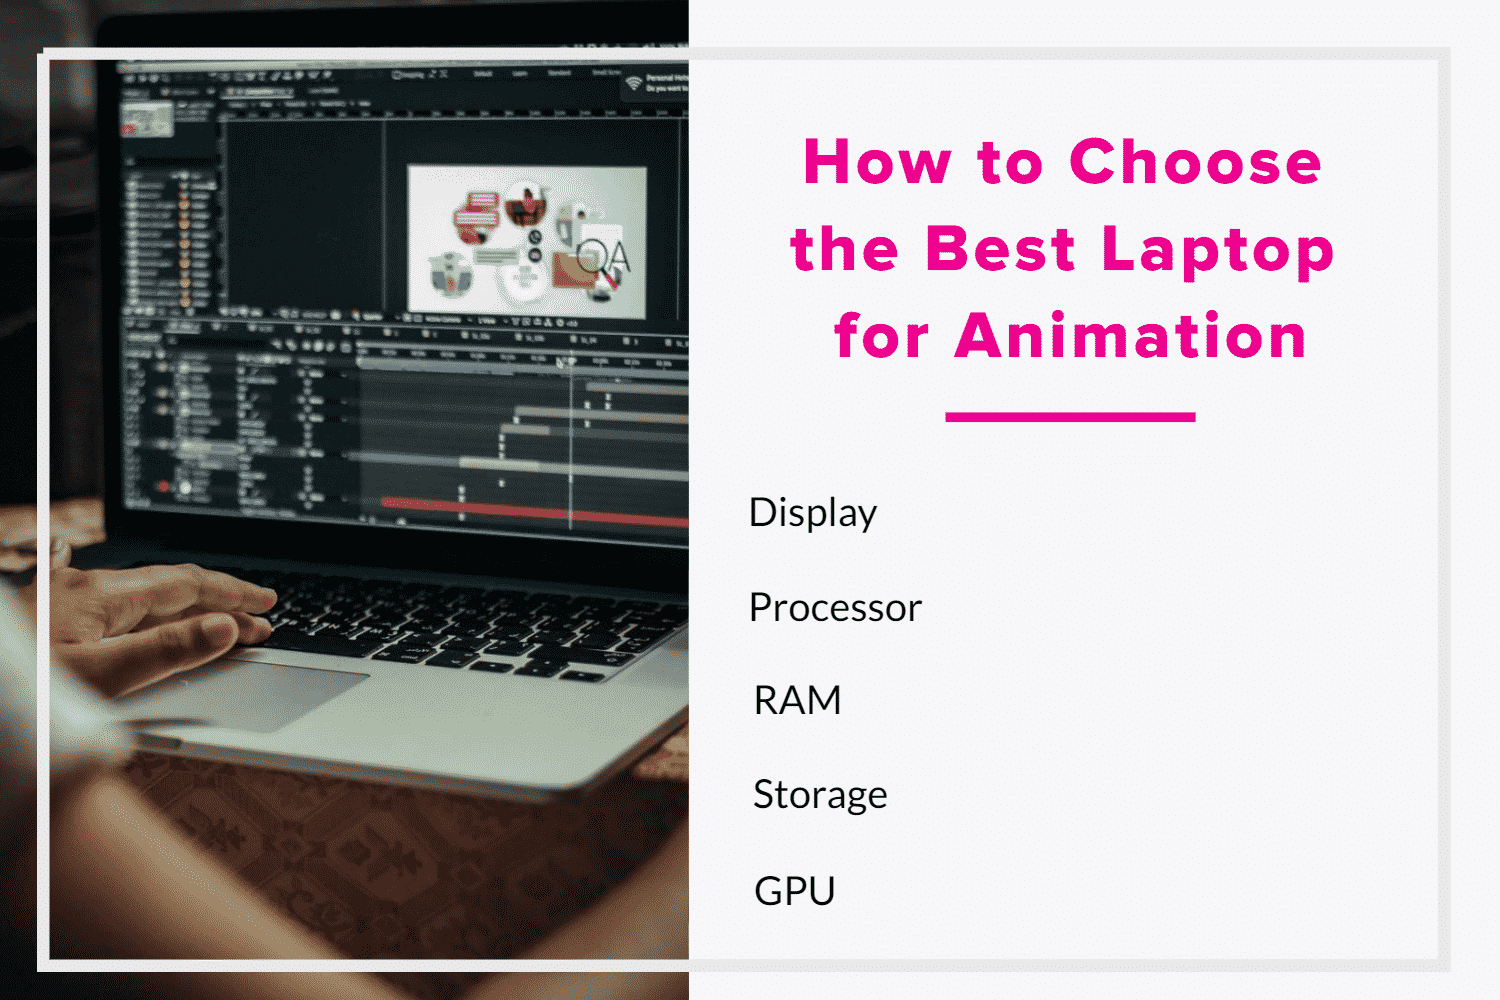 How to Choose the Best Laptop for Animation